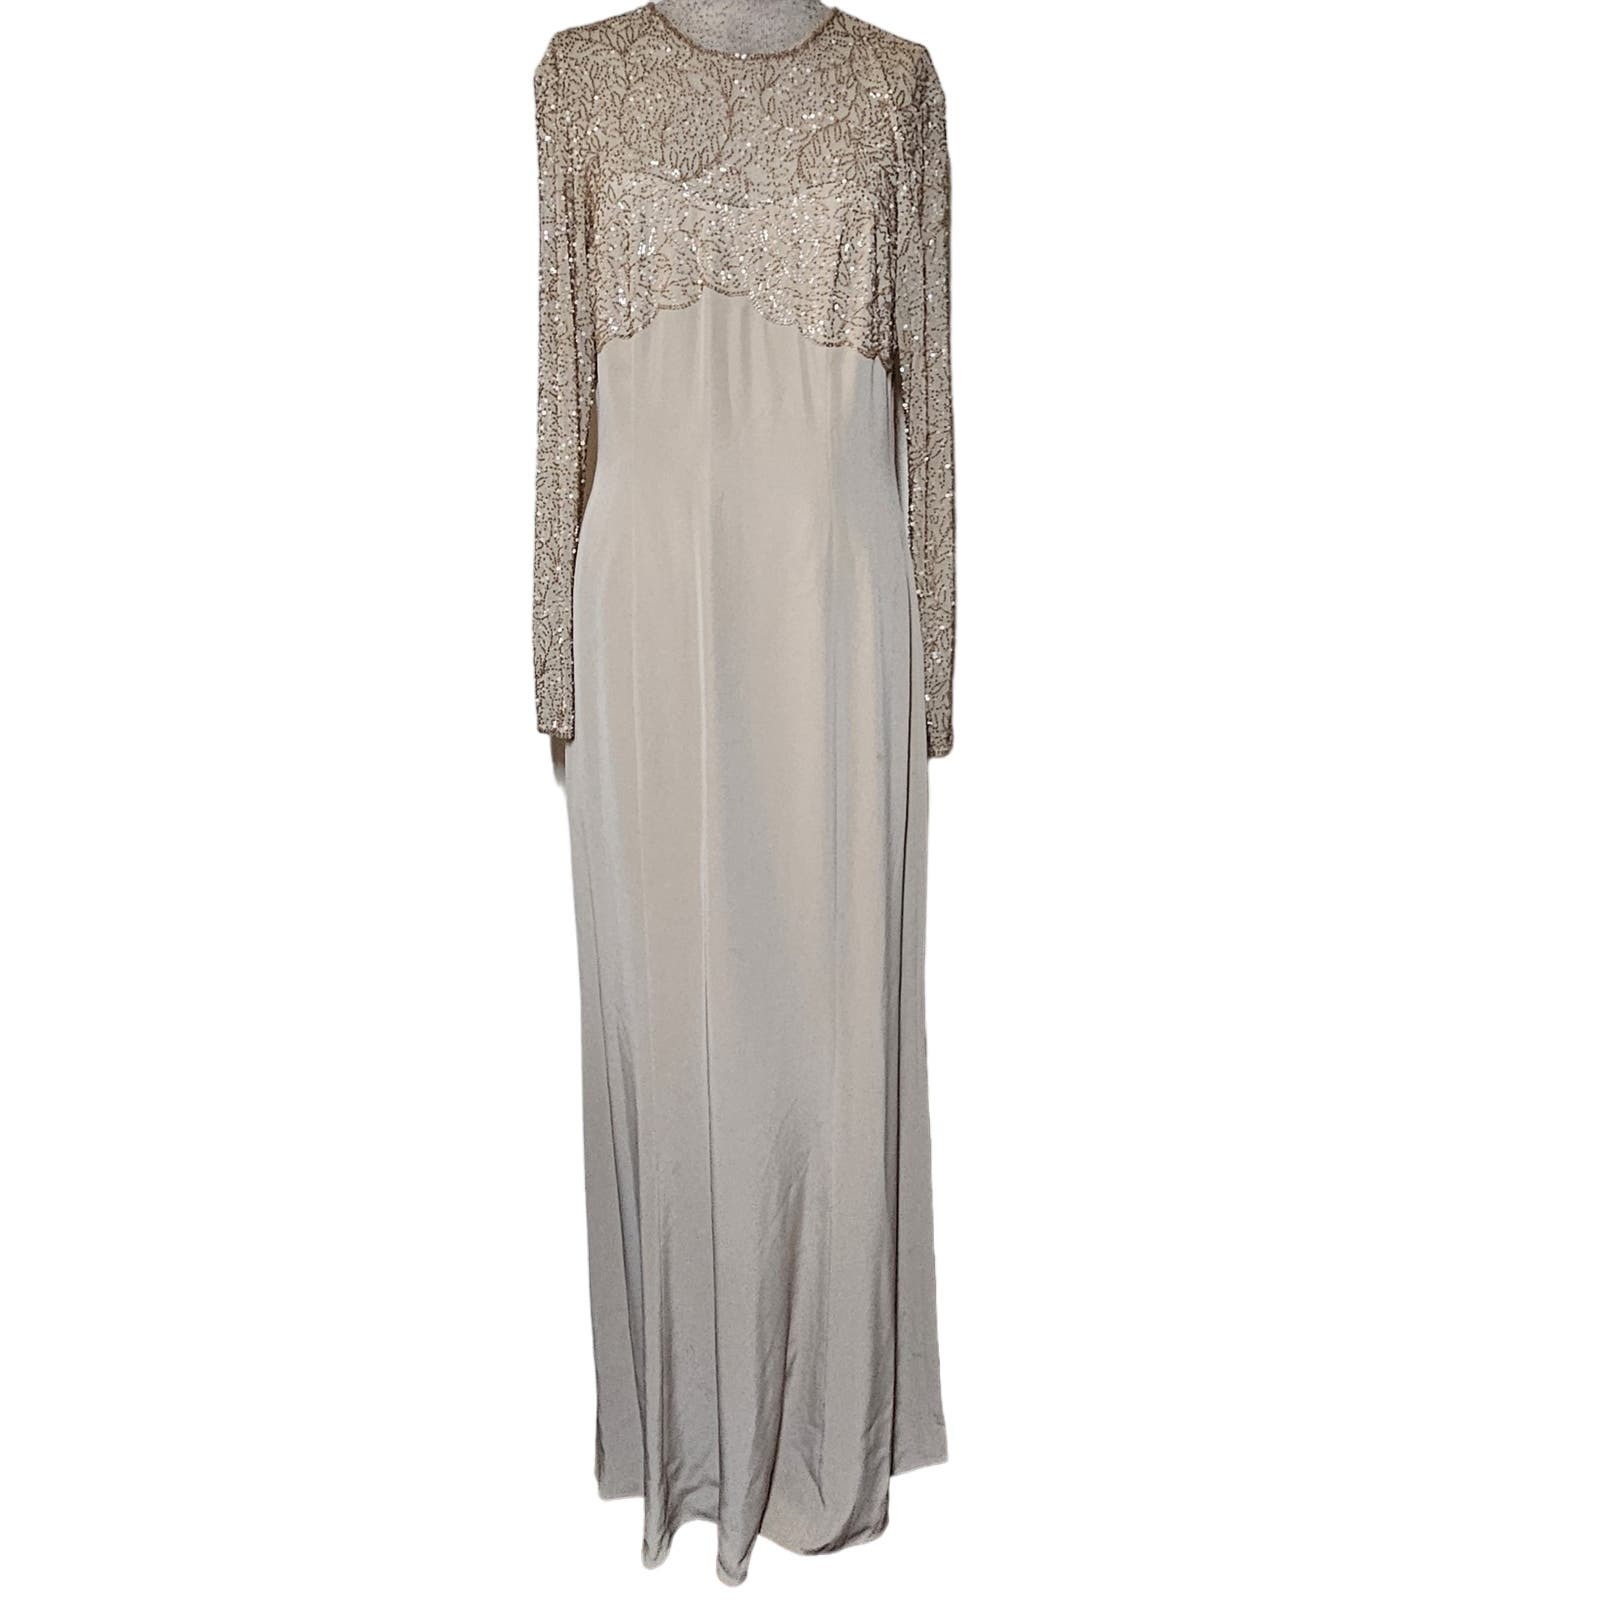 Primary image for Cream Beaded Long Sleeve Maxi Dress Size 8